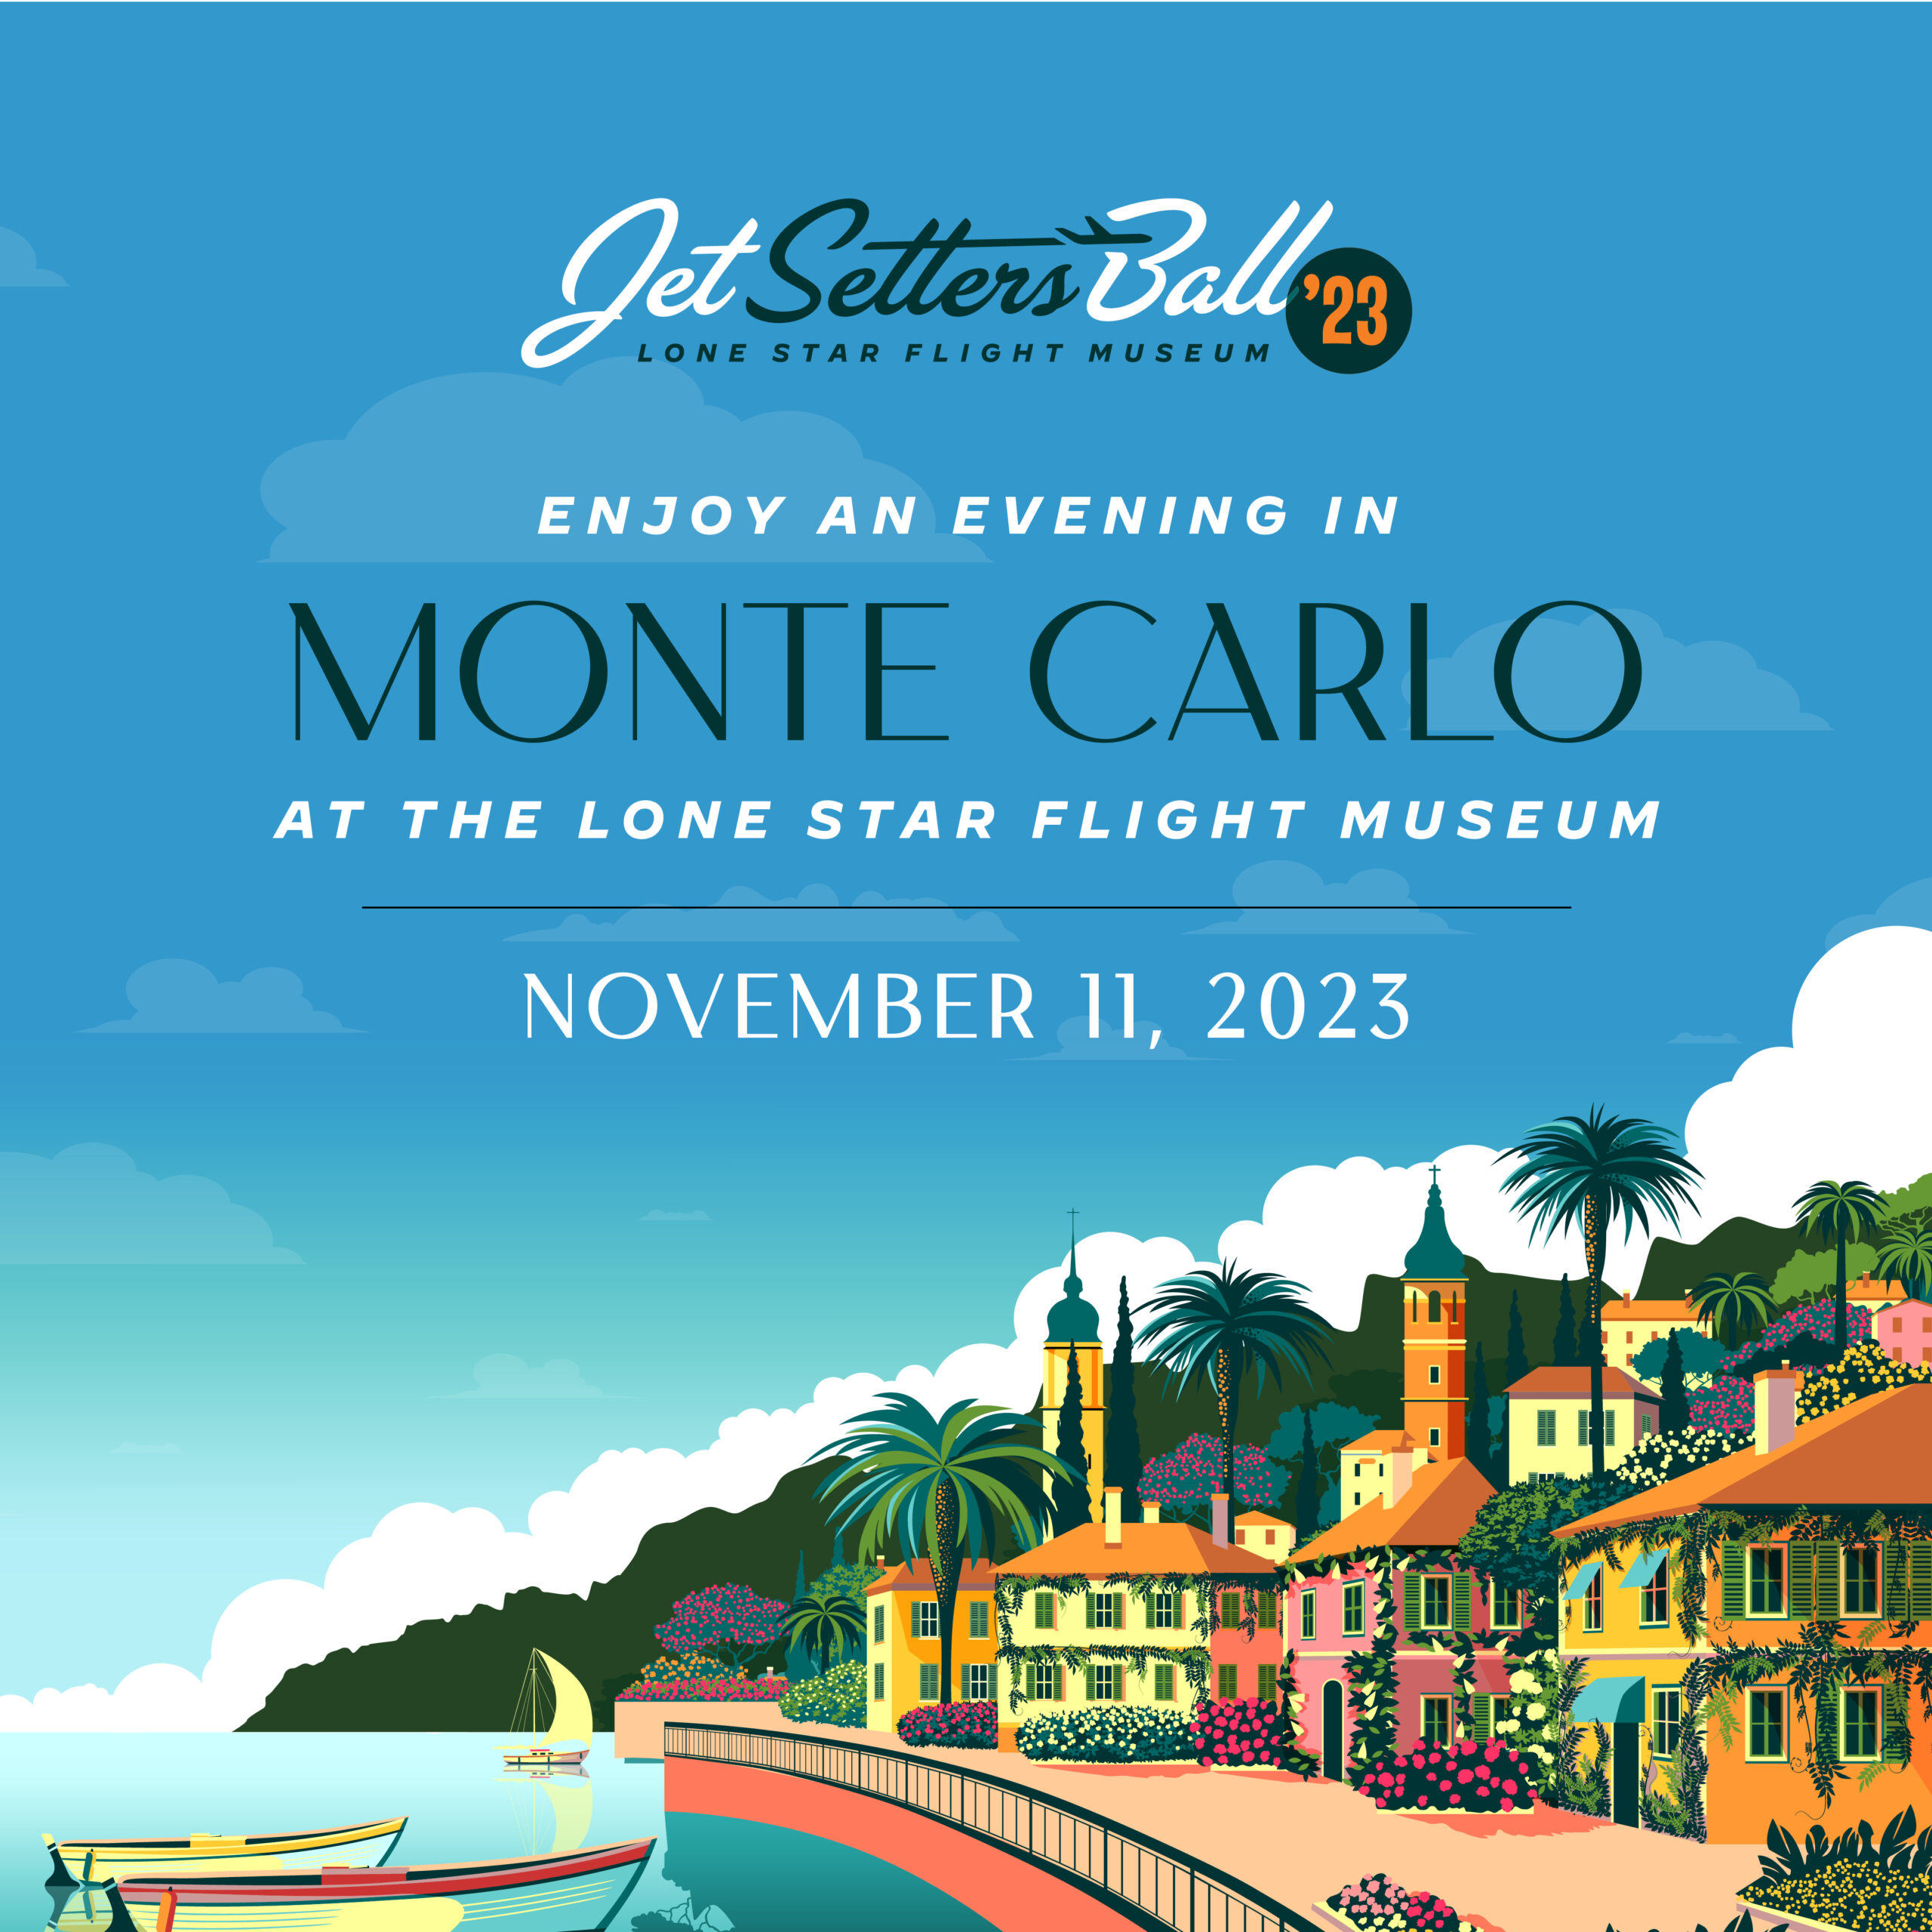 Jet Setters Ball 23 - Greetings From Monte Carlo